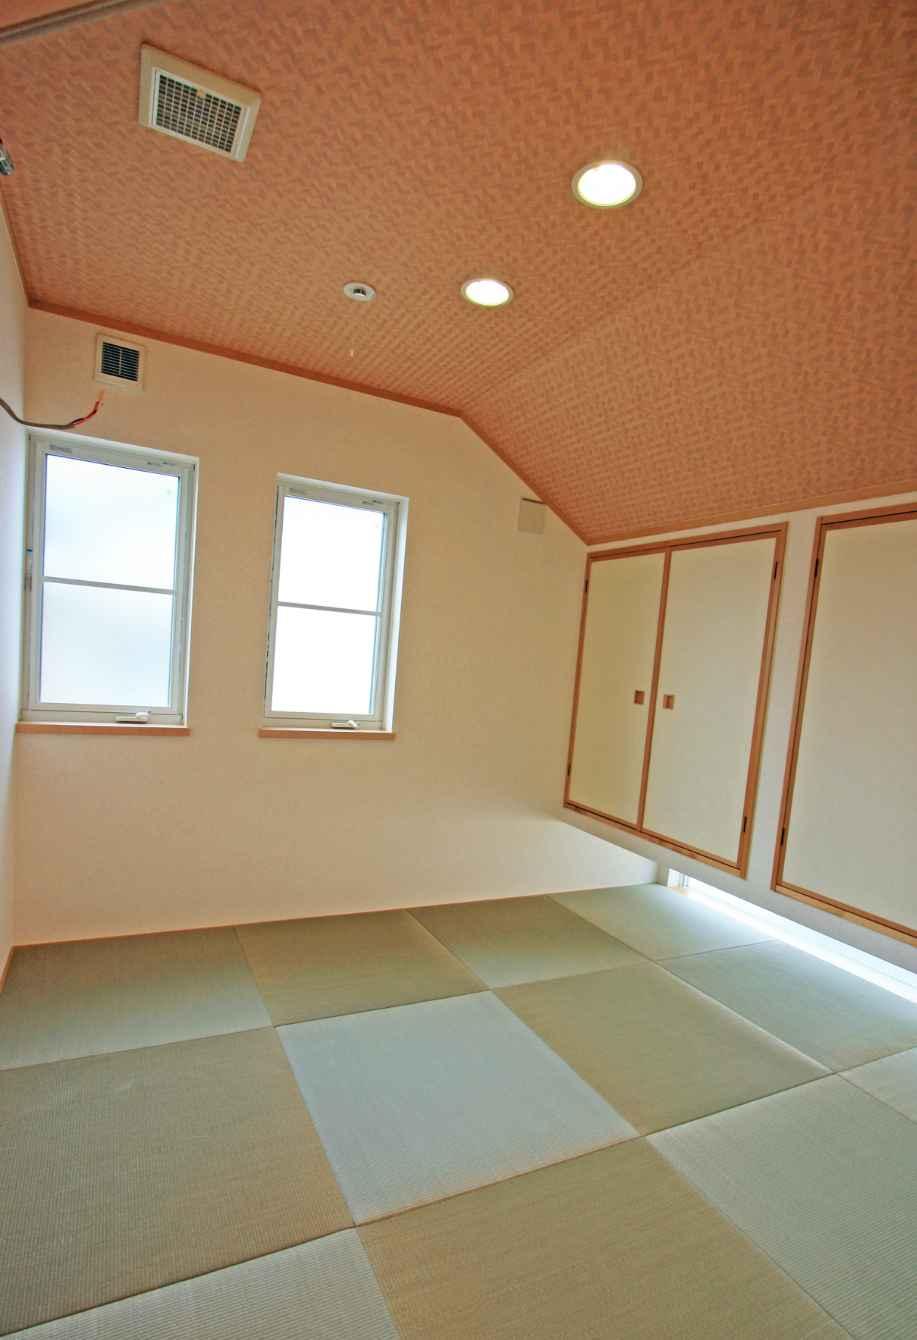 Non-living room. Japanese-style room that can be slowly settle down! 